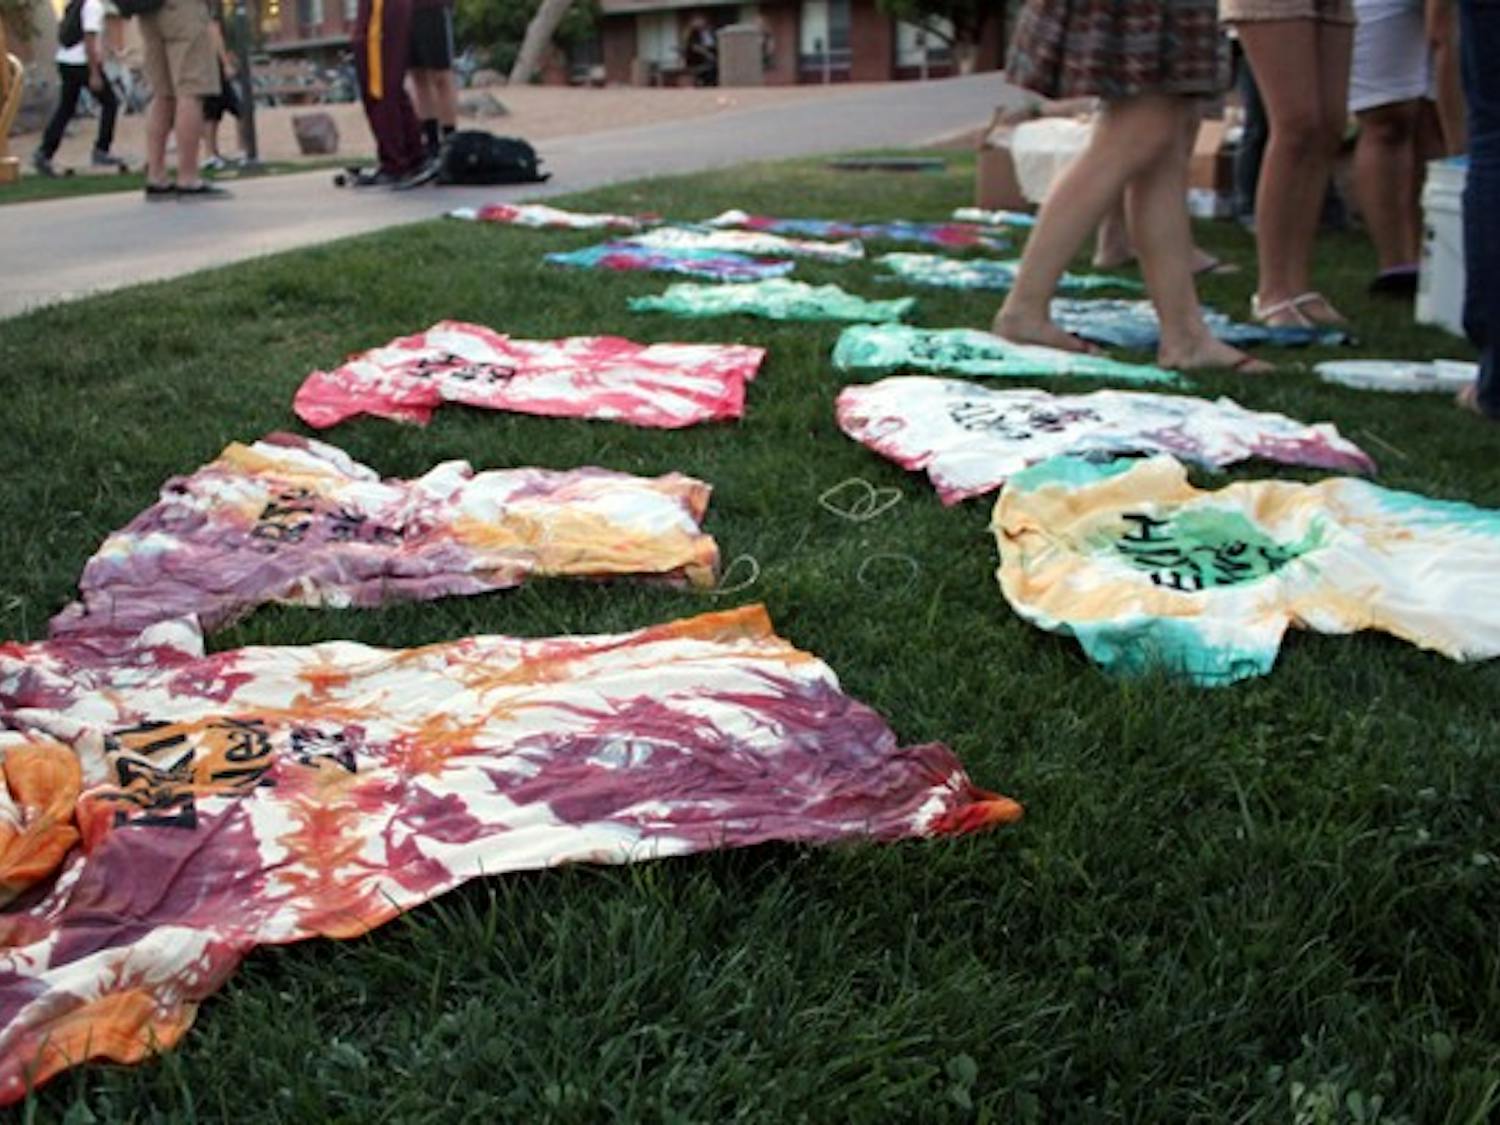 Students gathered on the Palo Verde lawn Tuesday for free food, a fashion show of clothing made from recycled items, free giveaways and T-shirt dyeing to celebrate Earth Week. (Photo by Marissa Krings)